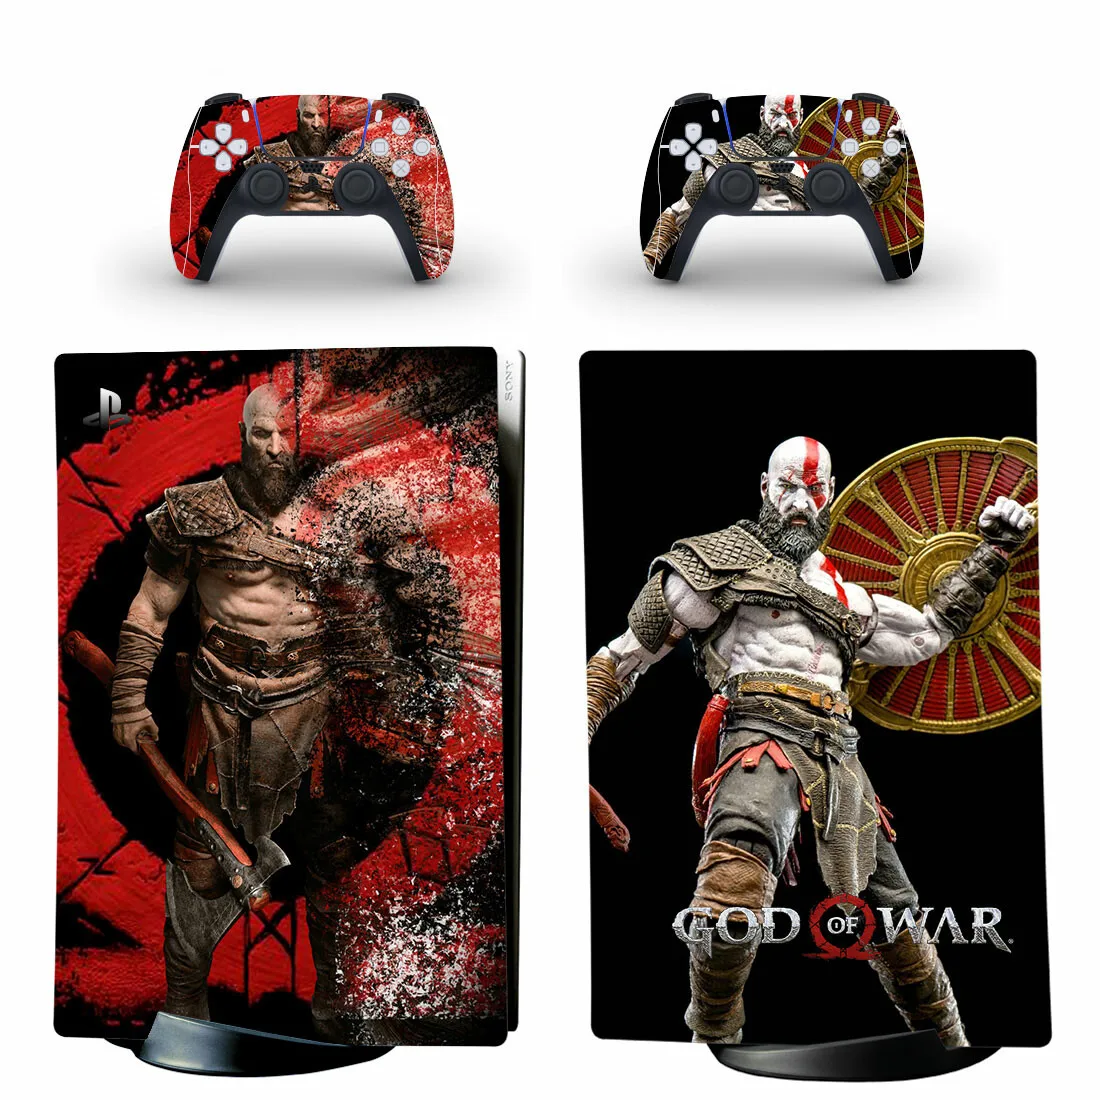 

God of War PS5 Digital Skin Sticker Cover for Playstation 5 Console & 2 Controllers Decal Vinyl Skins